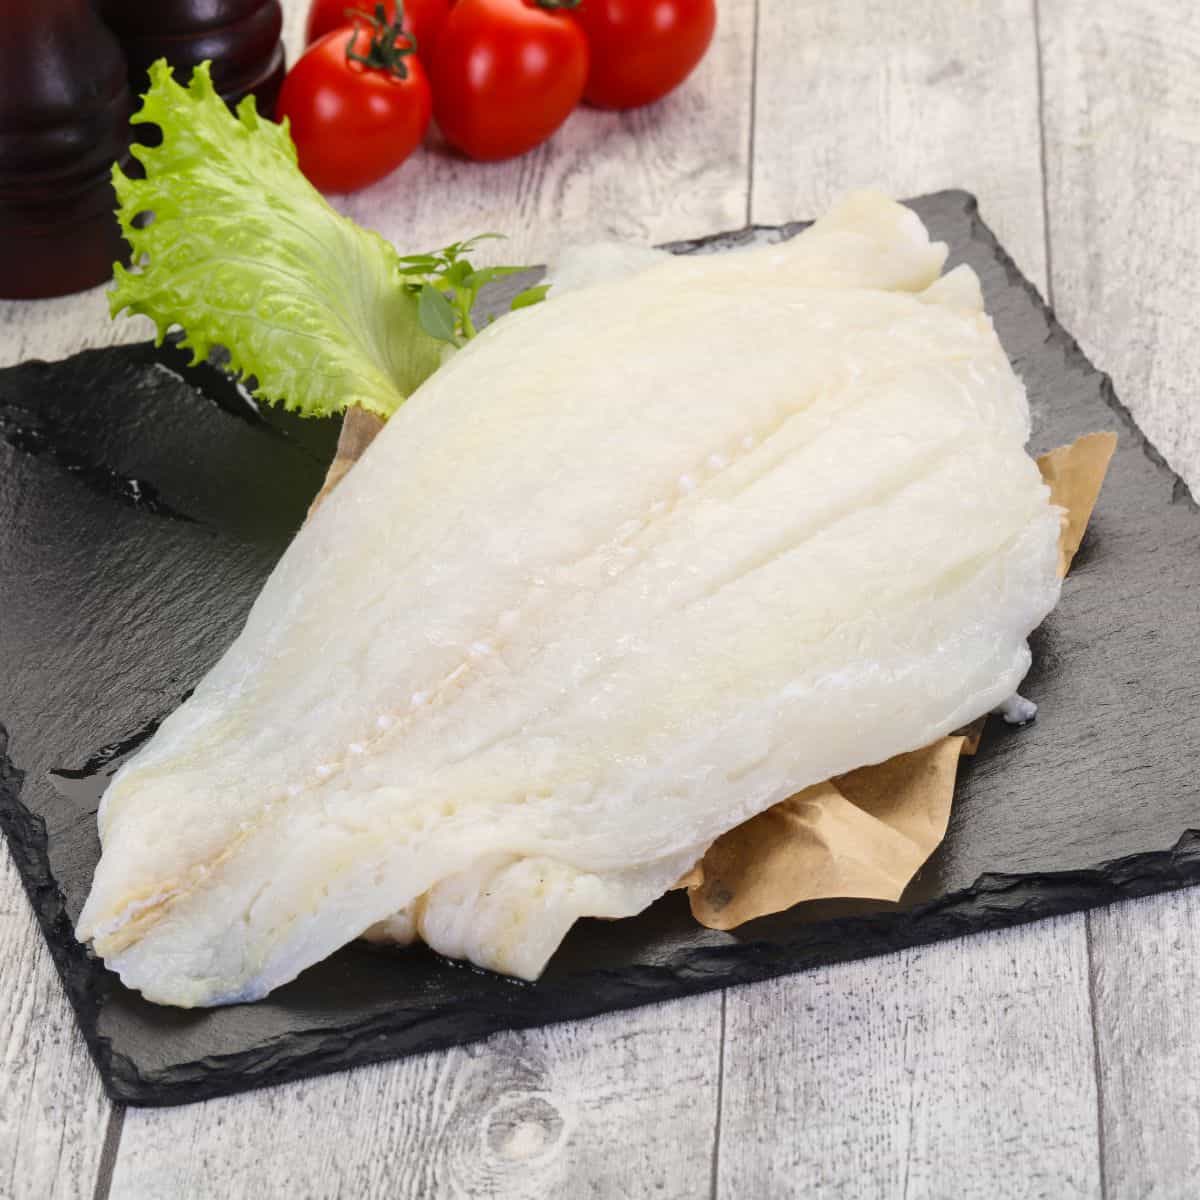 A raw piece of halibut fish filet on a black slab with a lettuce leaf and cherry tomatoes